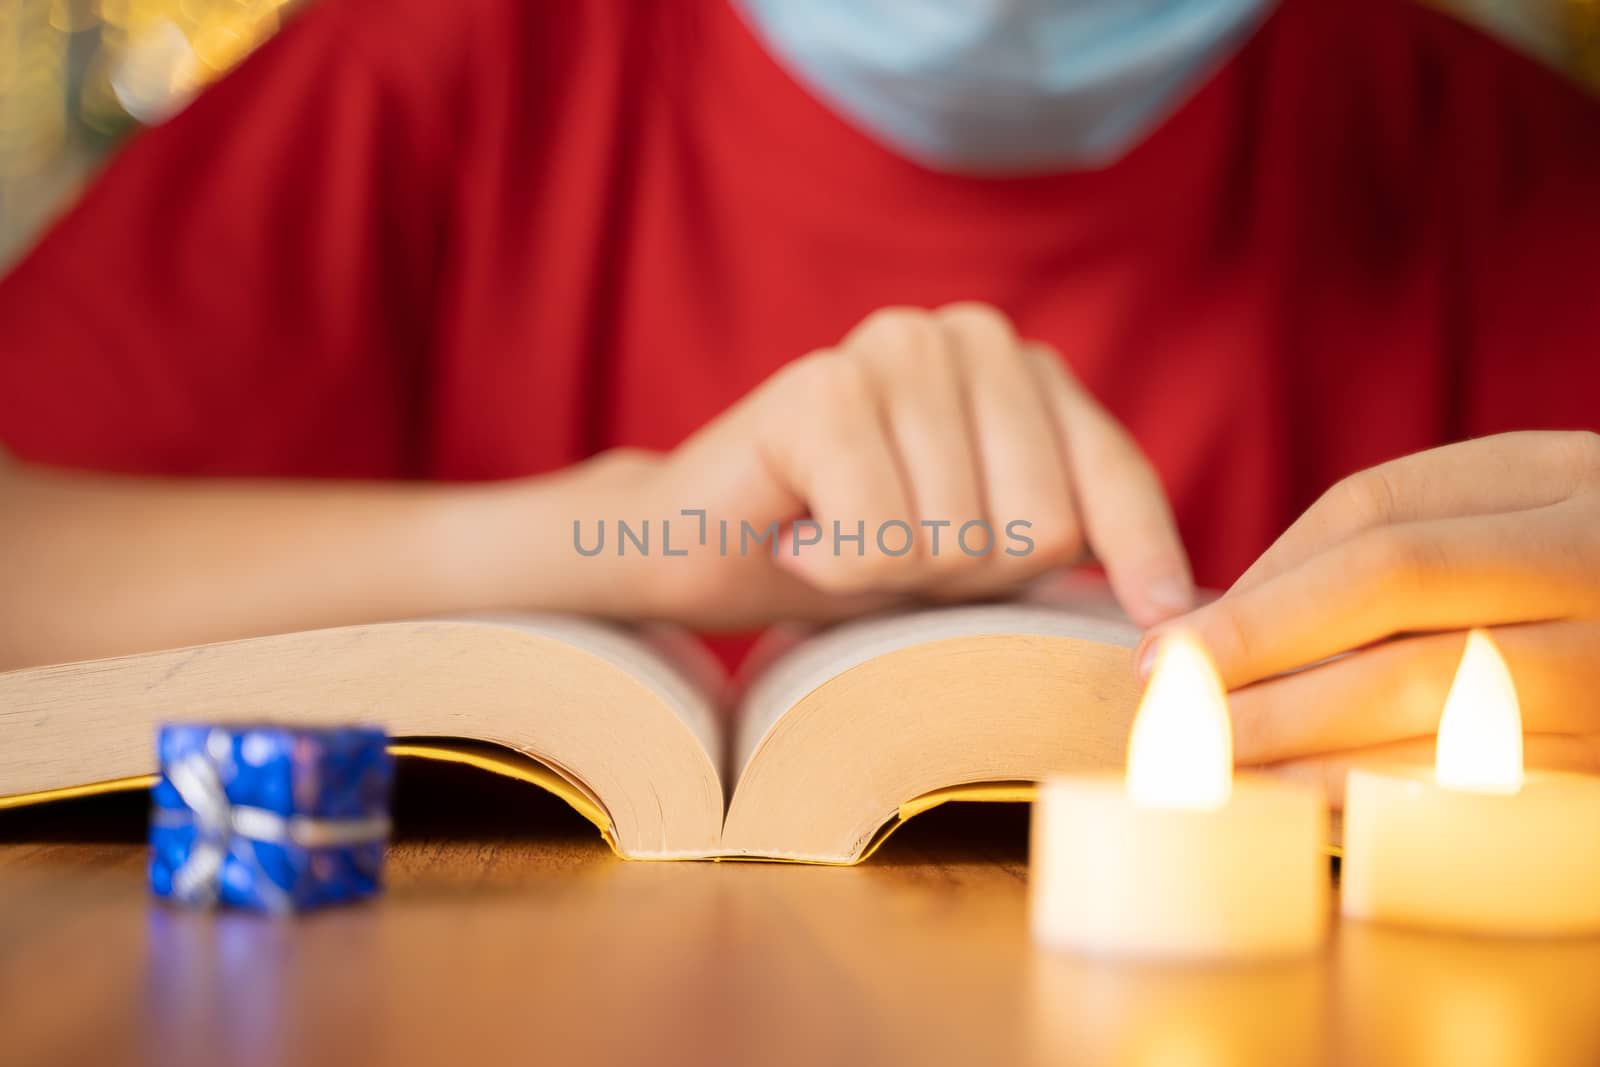 Close up shot of hands reading bible with candles in front on decorated Christmas background during xmas festival celebration by lakshmiprasad.maski@gmai.com